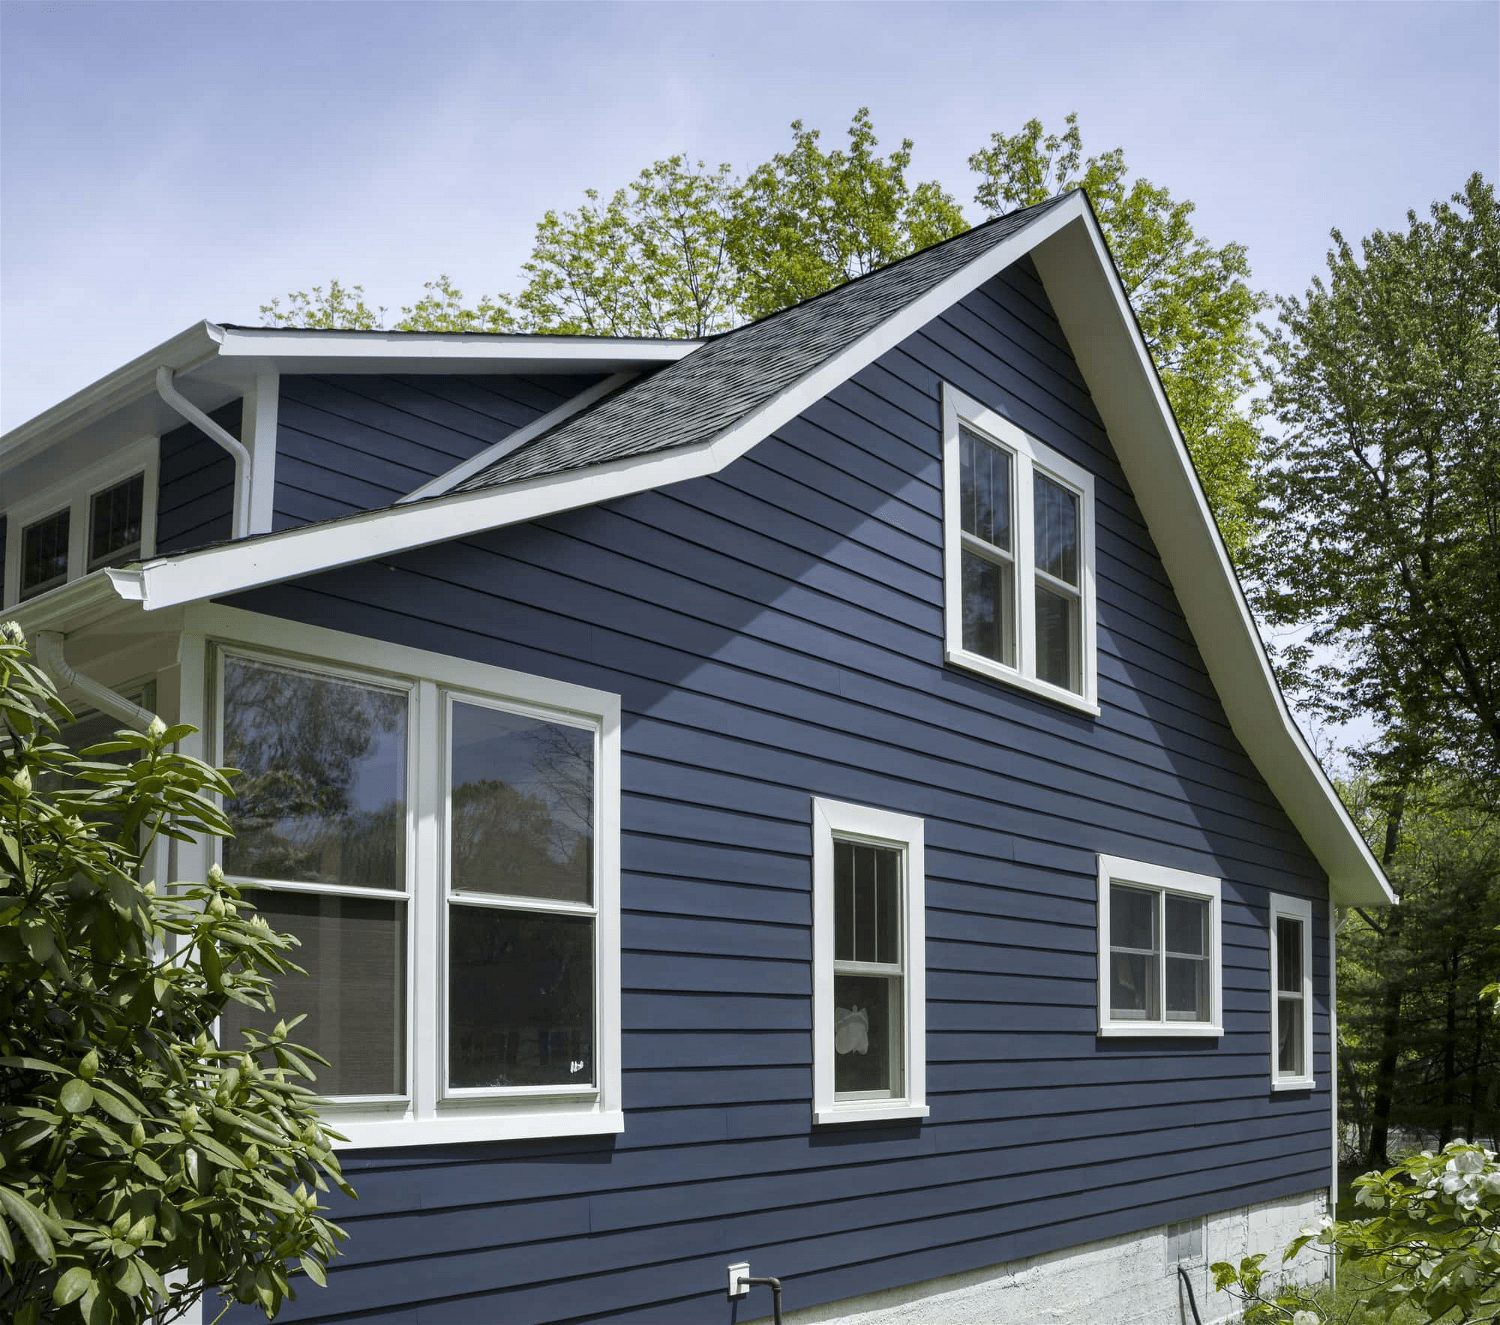 The side of a home with dark blue clapboard siding and white trim and windows.